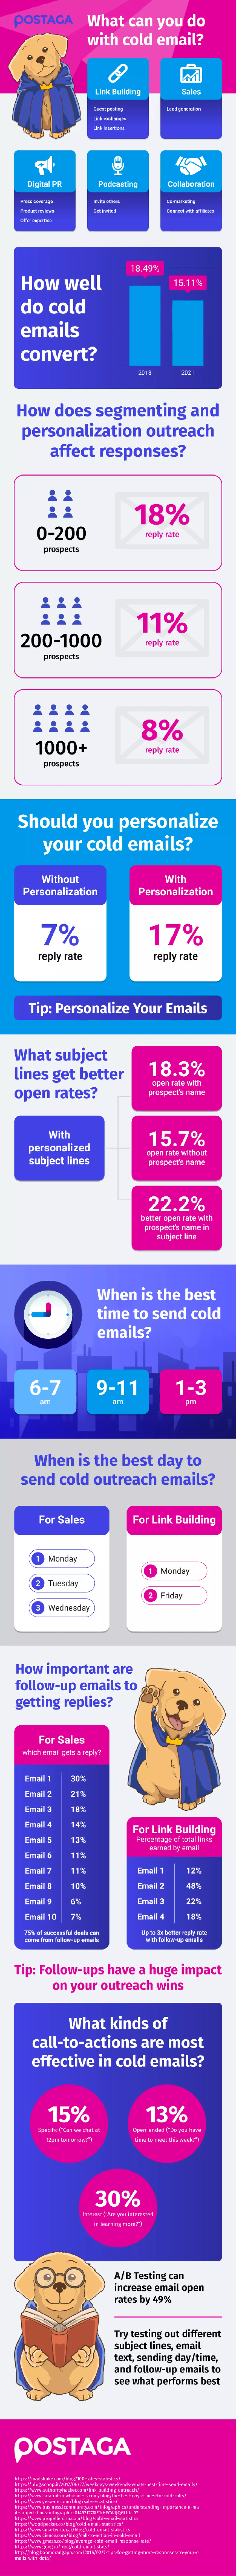 Postaga cold email stats